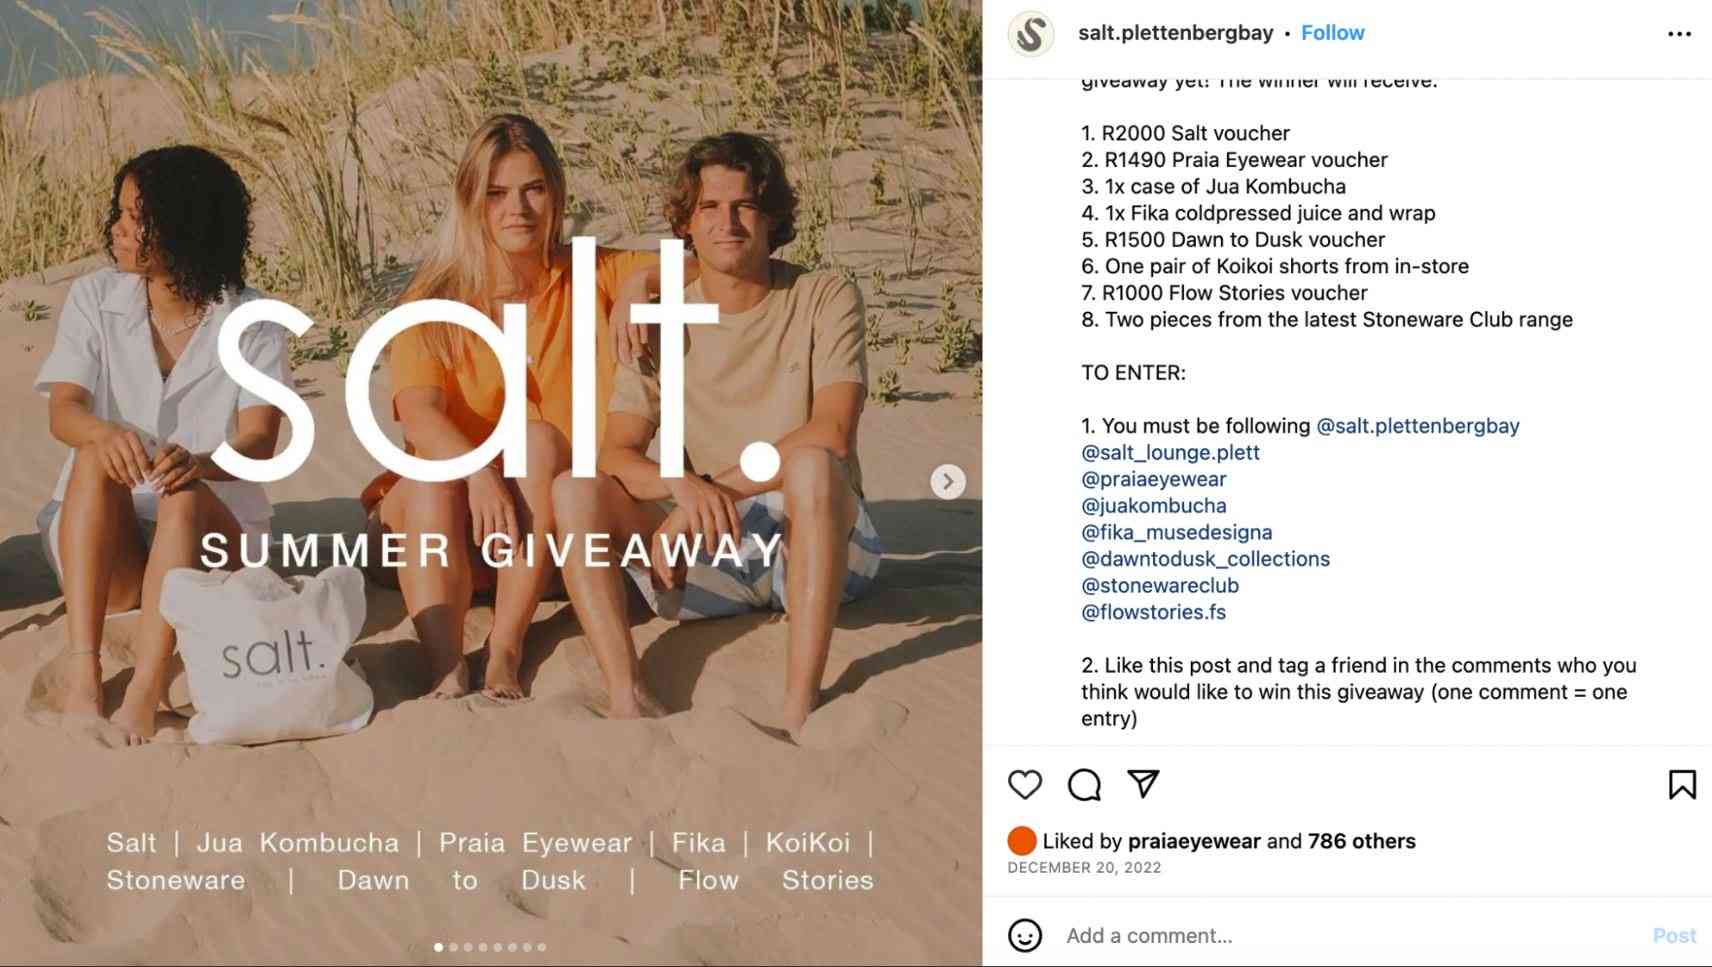 Example of an Instagram photo contest with brands partnering with other brands